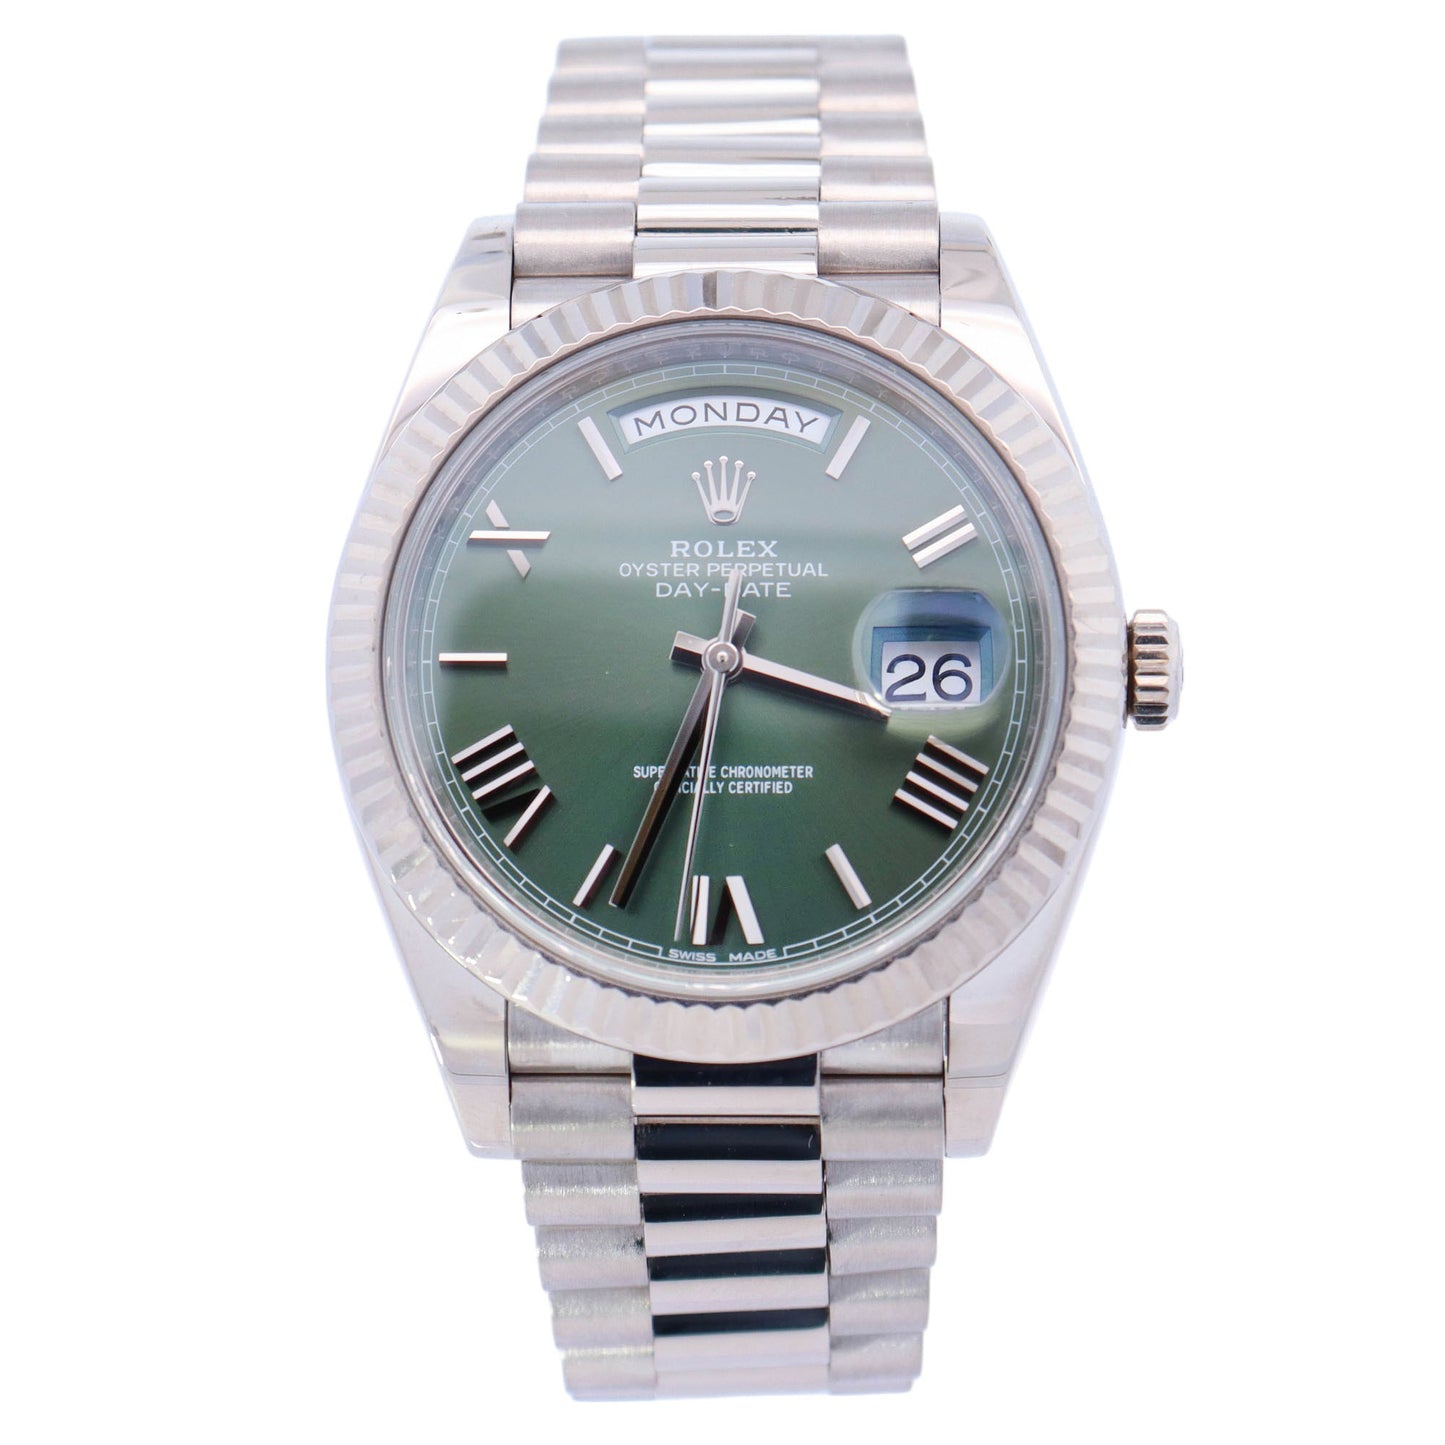 Rolex Day-Date White Gold 40mm Olive Roman Dial Watch Reference# 228239 - Happy Jewelers Fine Jewelry Lifetime Warranty